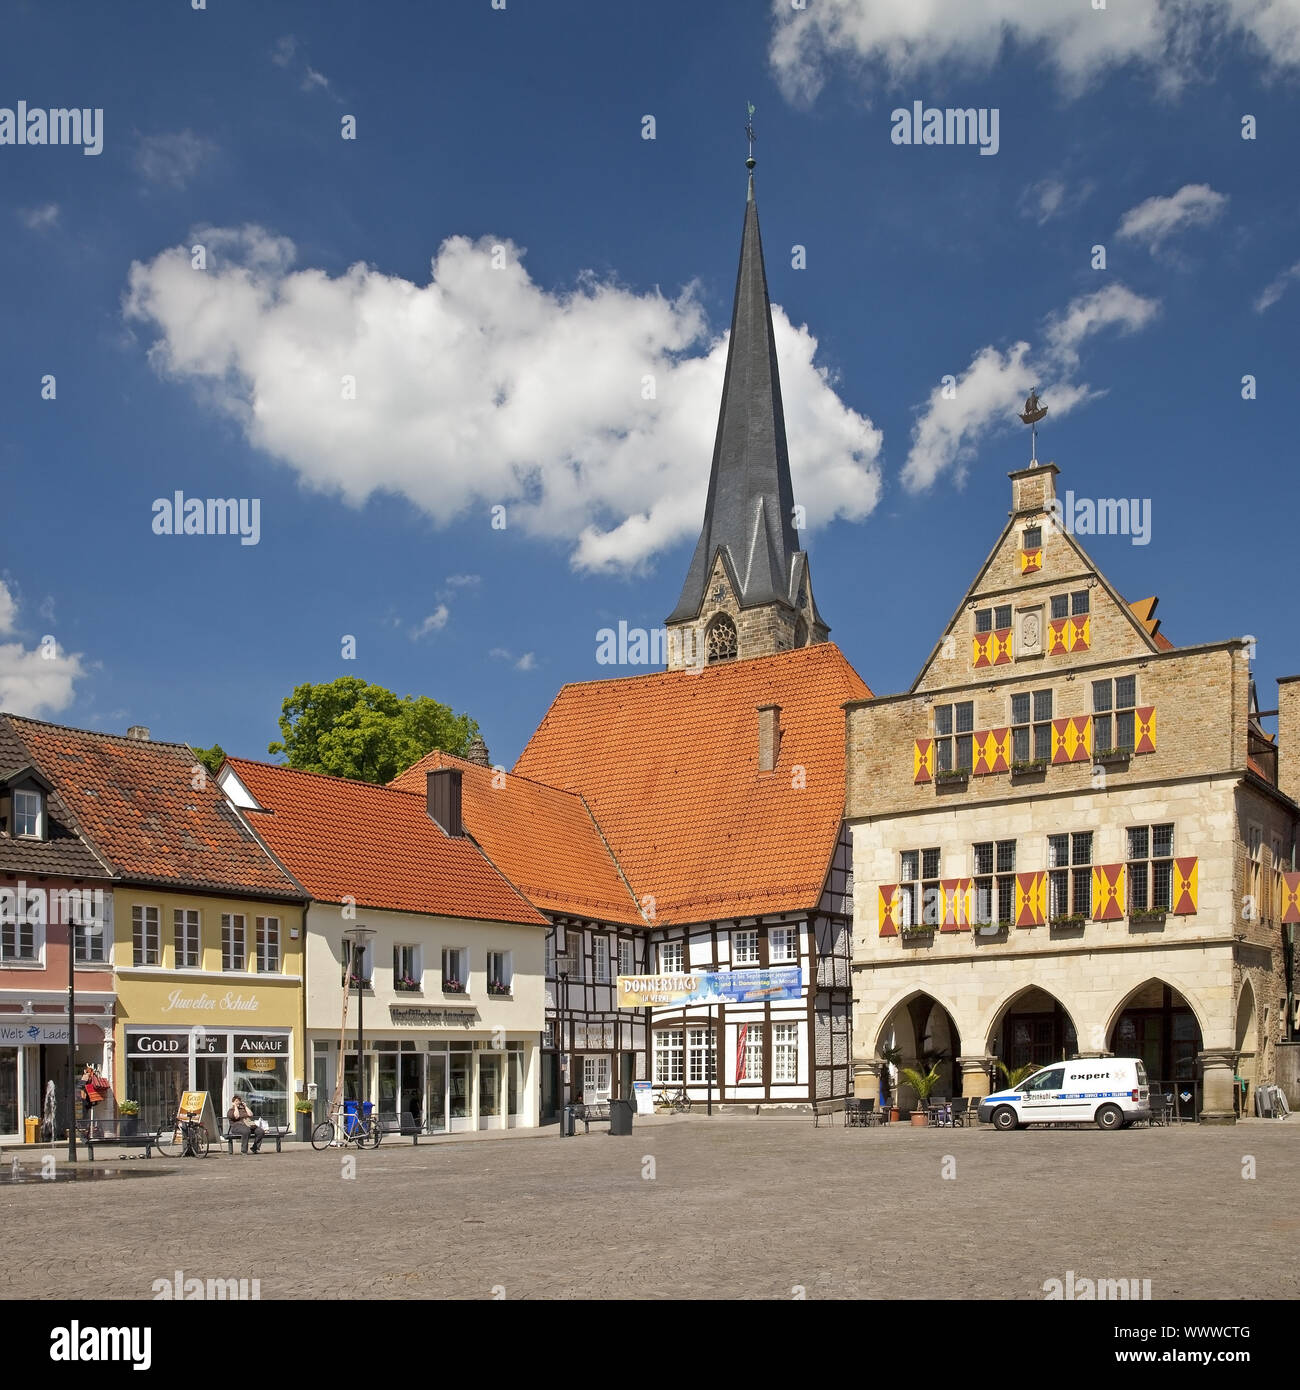 old city with town hall and St. Christopher Church, Werne, North Rhine-Westphalia, Germany, Europe Stock Photo